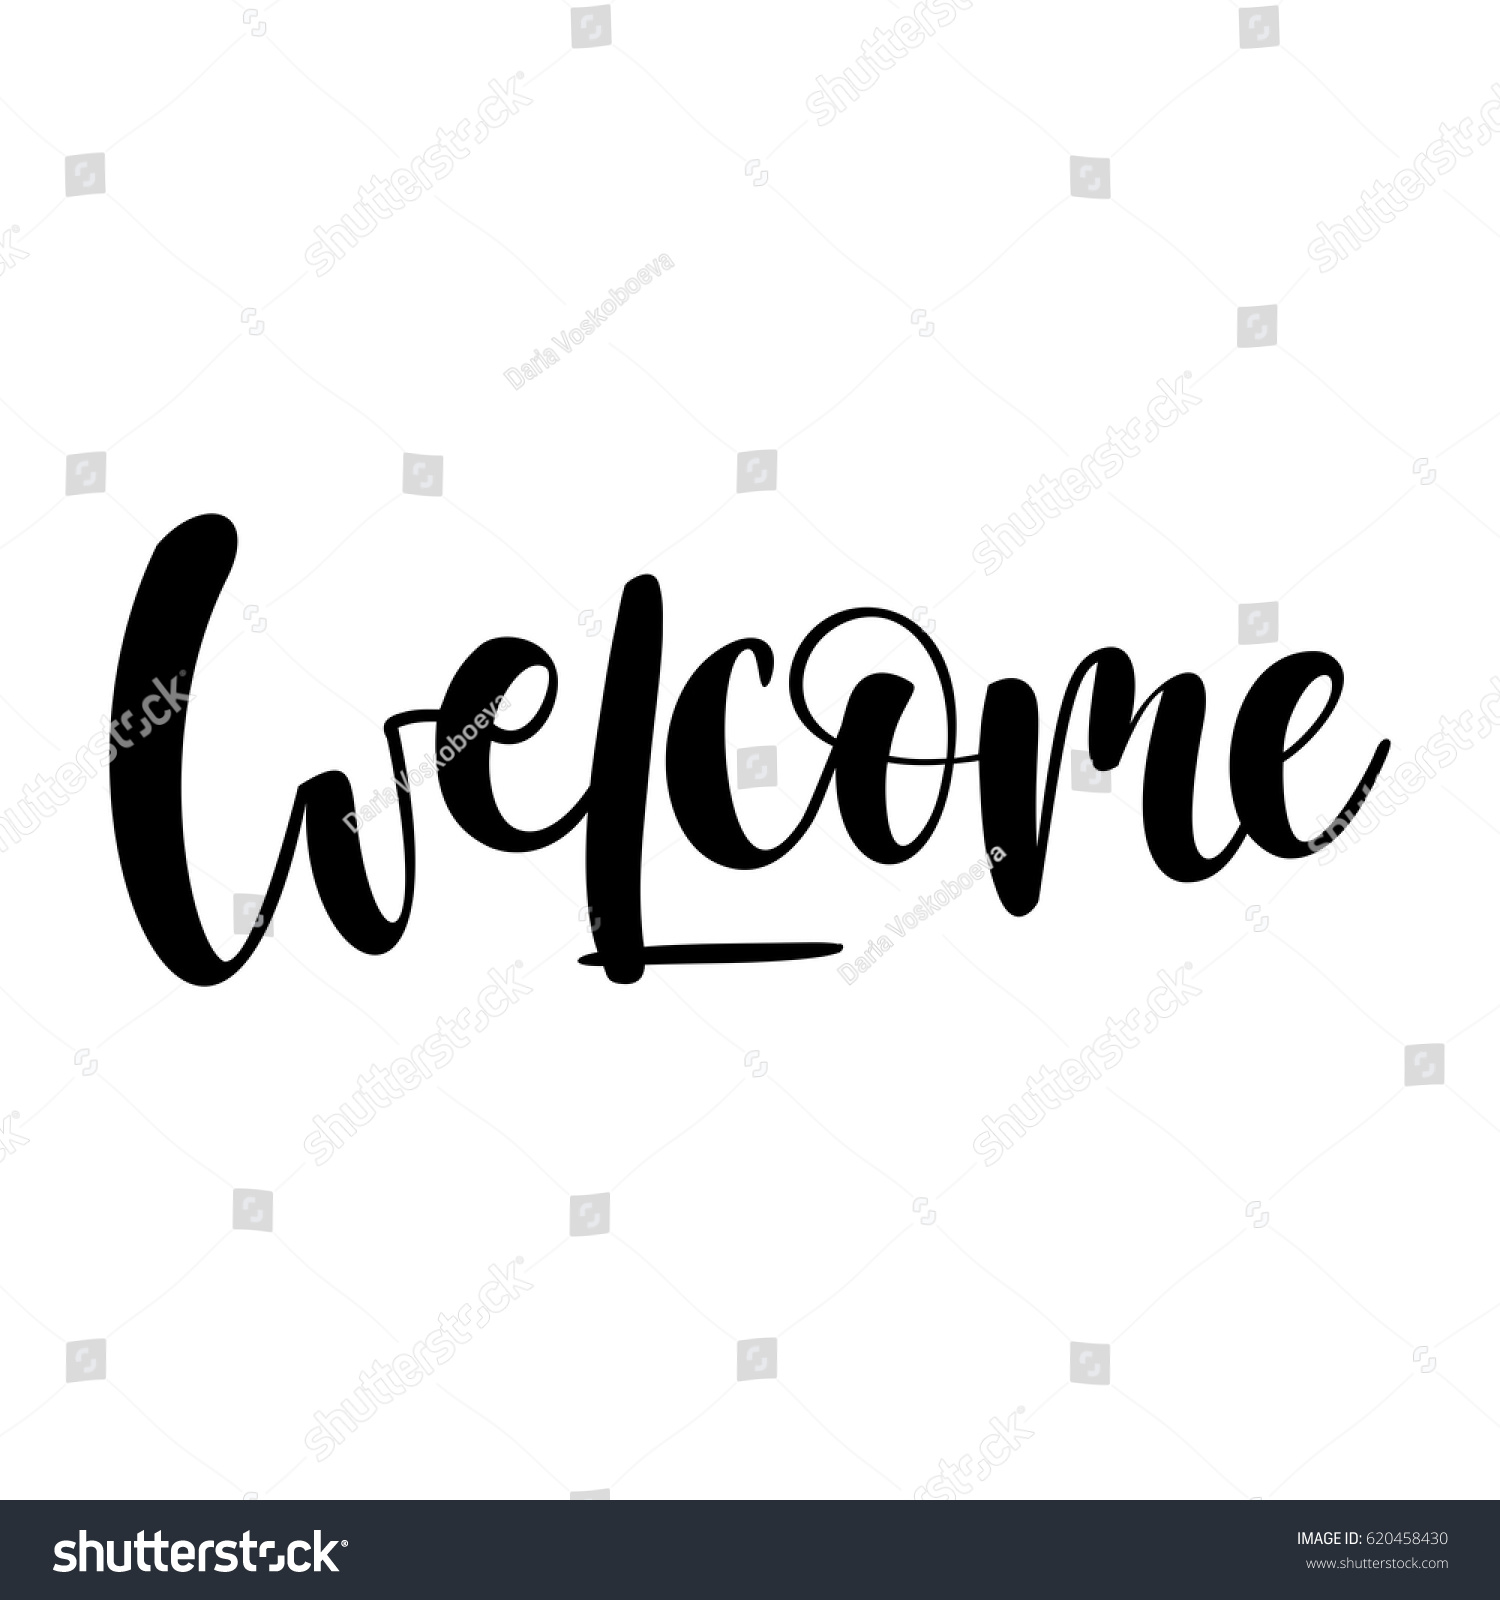 Welcome Lettering Sign Stock Vector (Royalty Free) 620458430 | Shutterstock